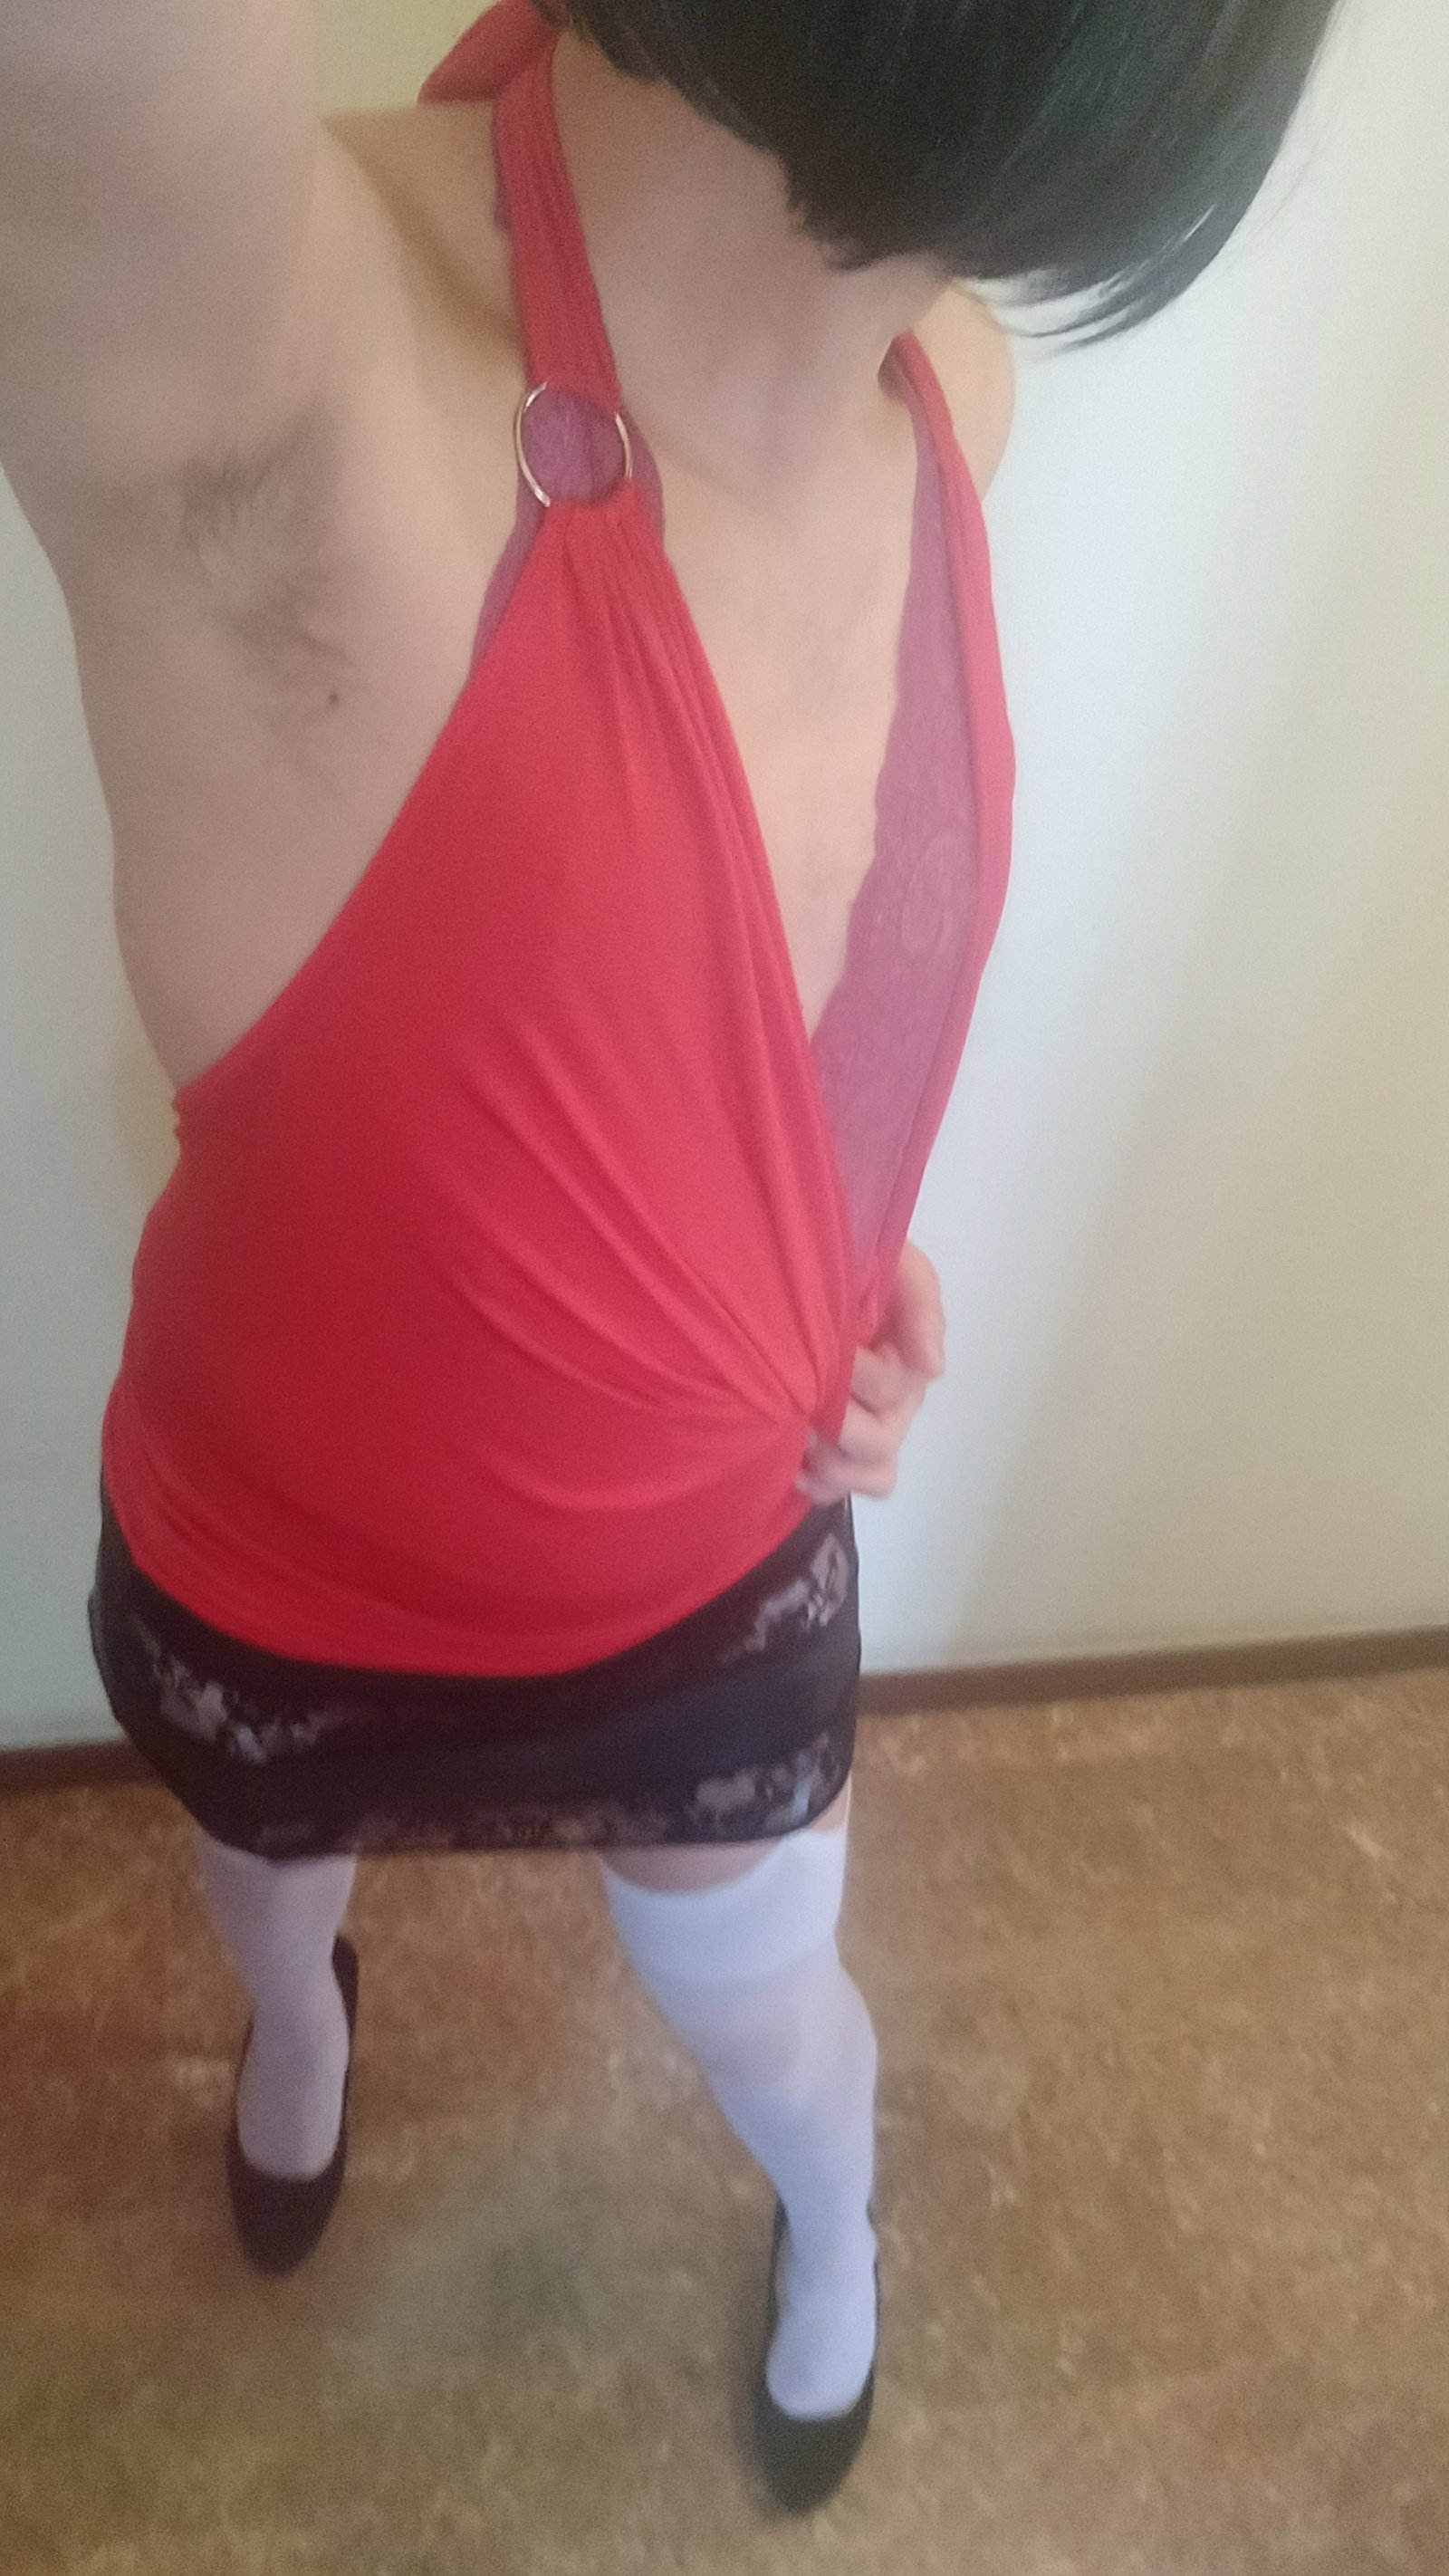 Photo by Monique C.D. with the username @MoniqueCD,  June 19, 2020 at 8:05 AM. The post is about the topic Crossdressers and the text says 'I slept dressed like below, and as I woke the only thing I wanted to do was keeping dressing like that! ...so I put on something more on top to feel like "dressing for the day".
I do love #crossdressing ! I really can't get enough..'